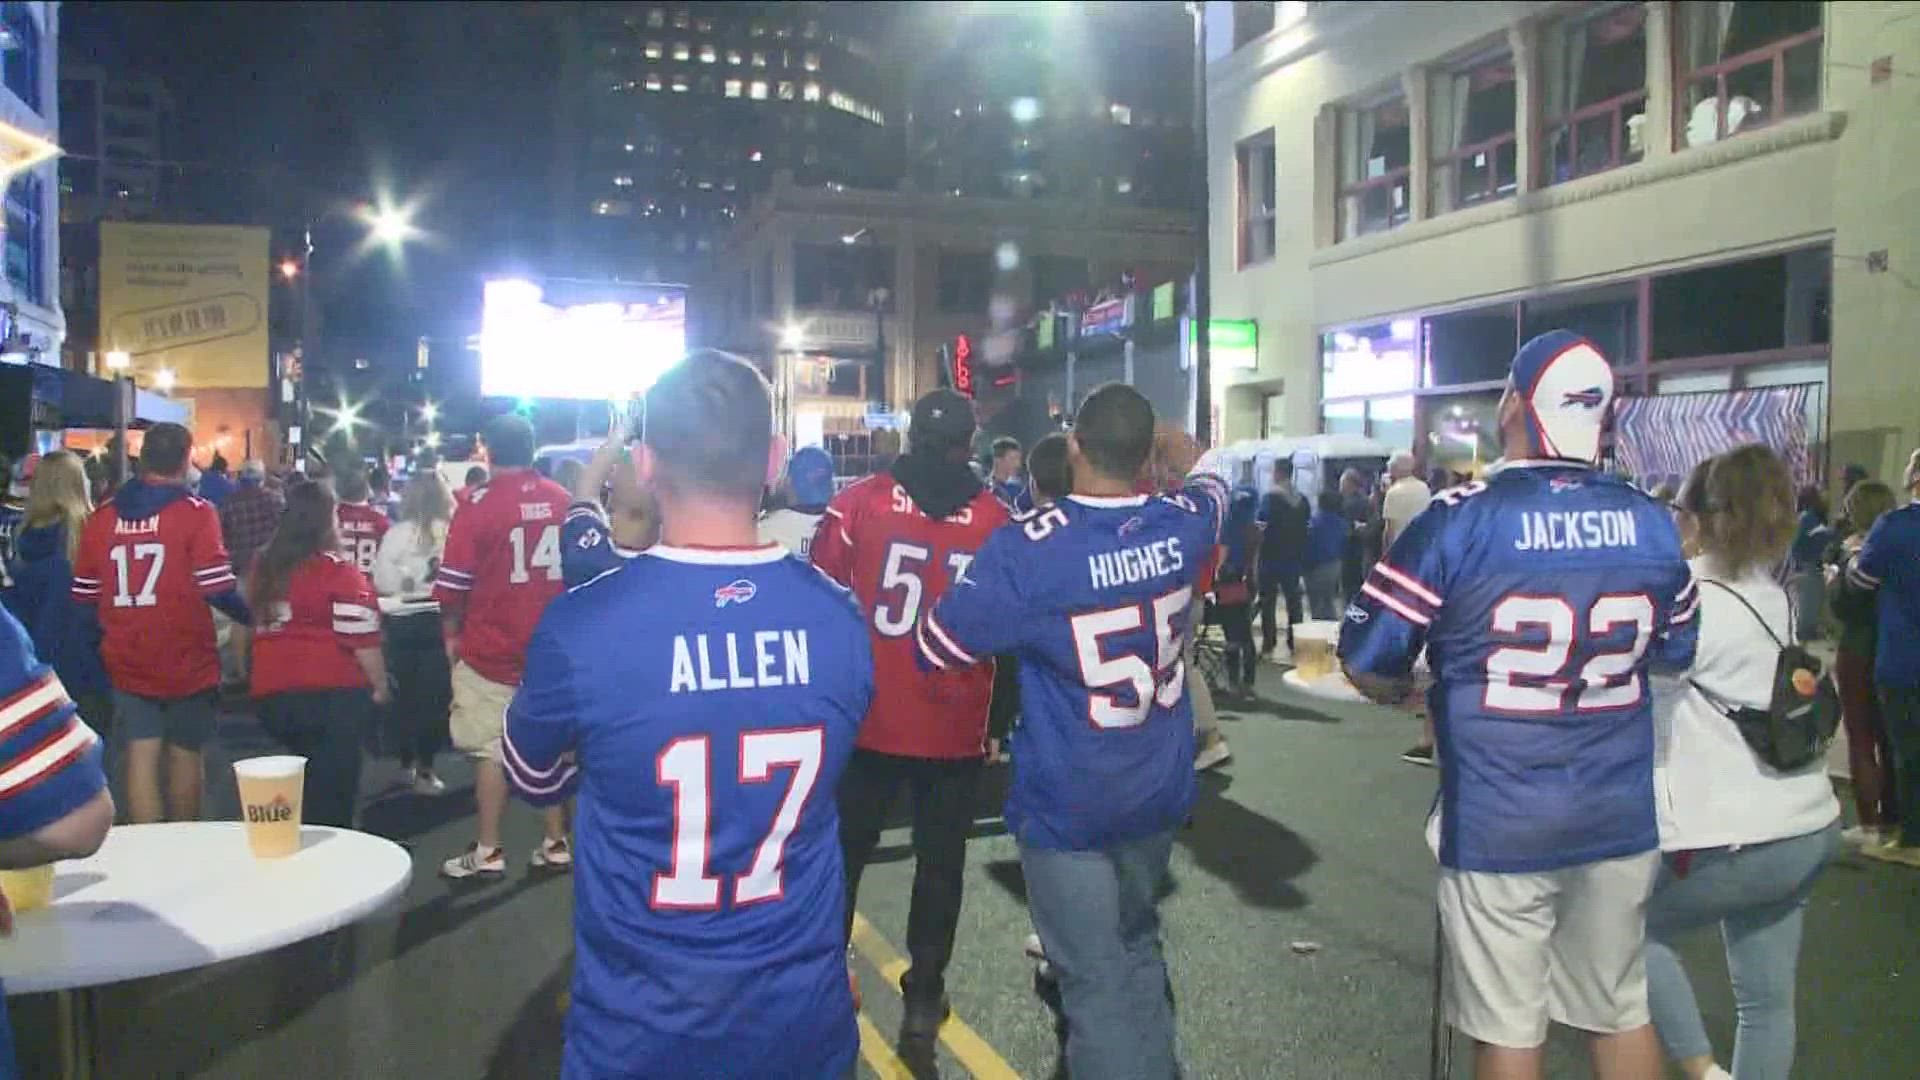 Restaurants, entertainment district gear up for Bills opener in L.A.